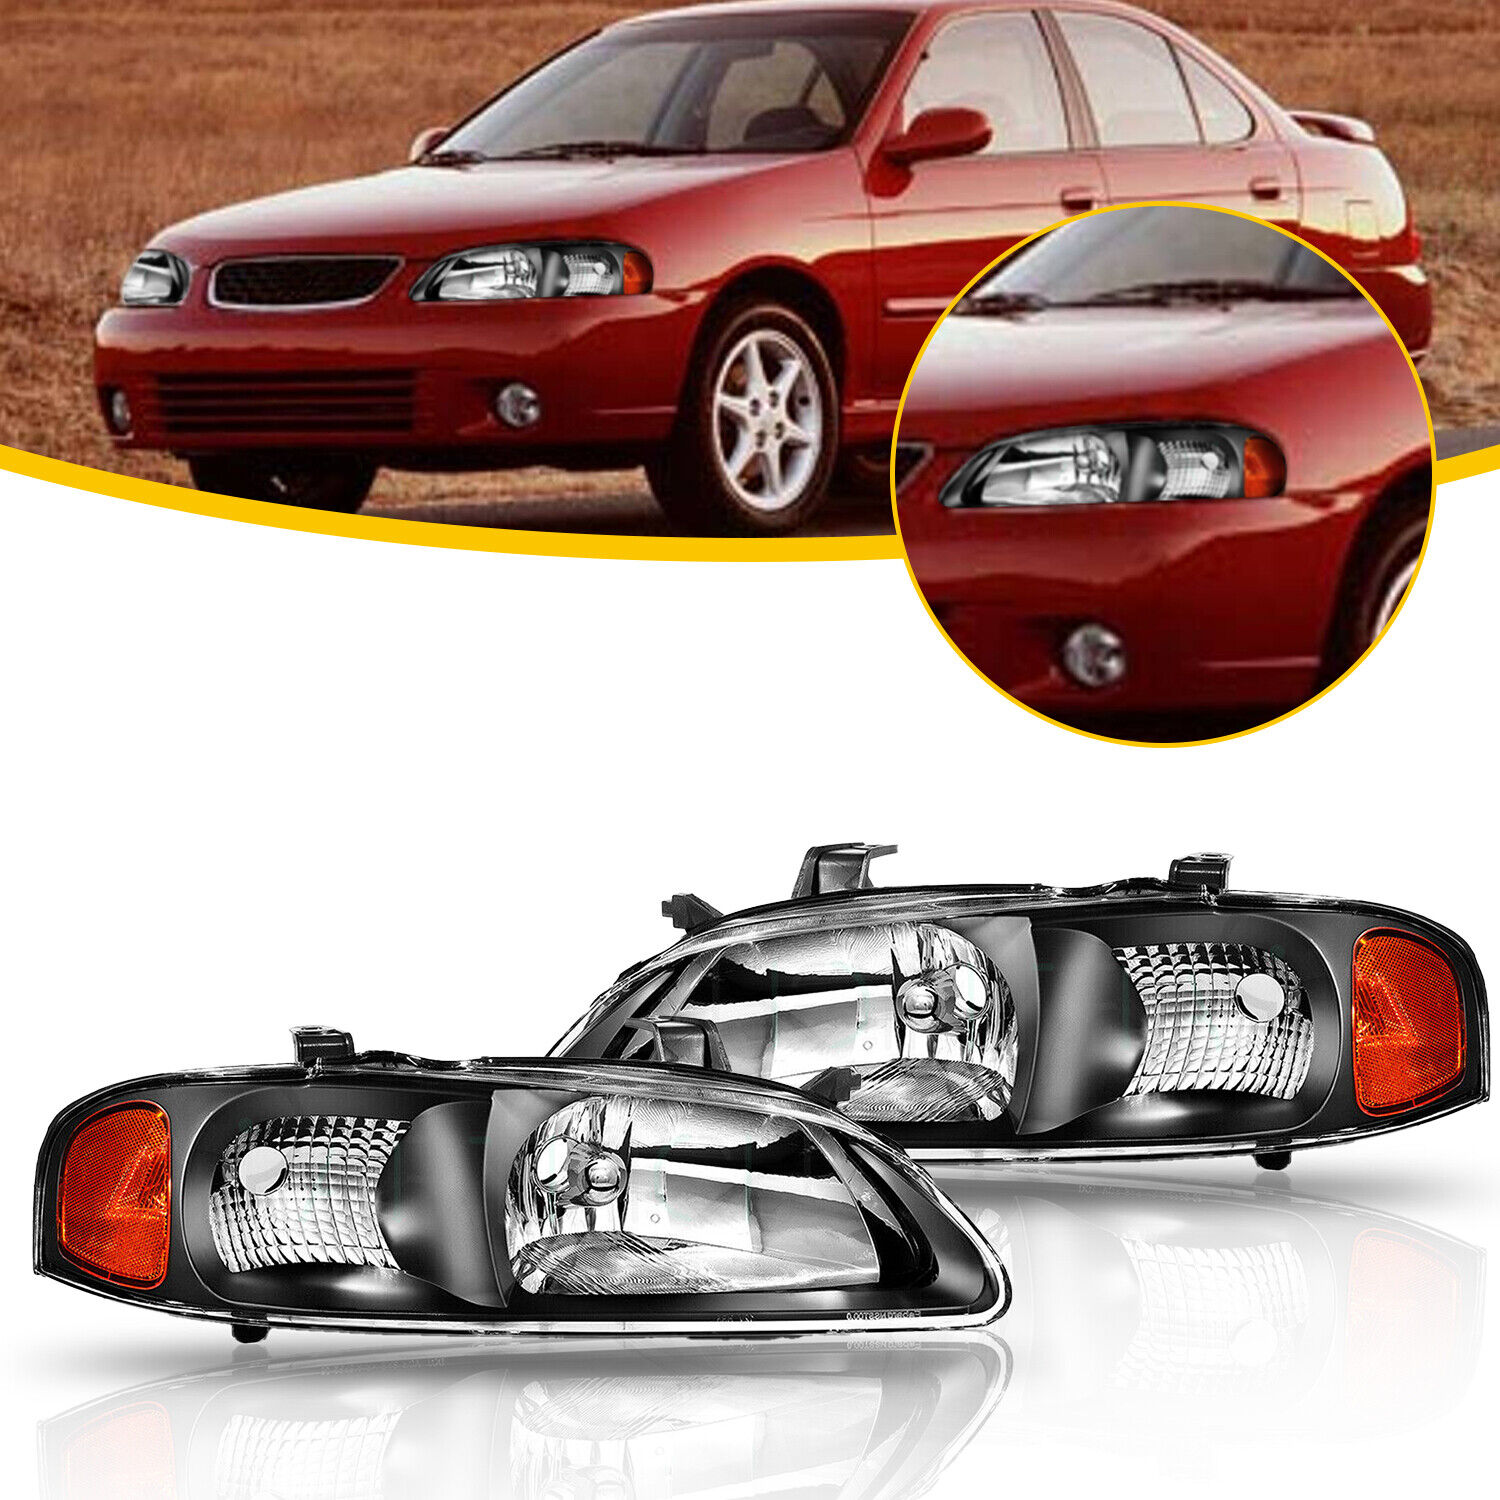 Headlights FOR Nissan Sentra 2000-2003 Black Light Front Headlamps Replace